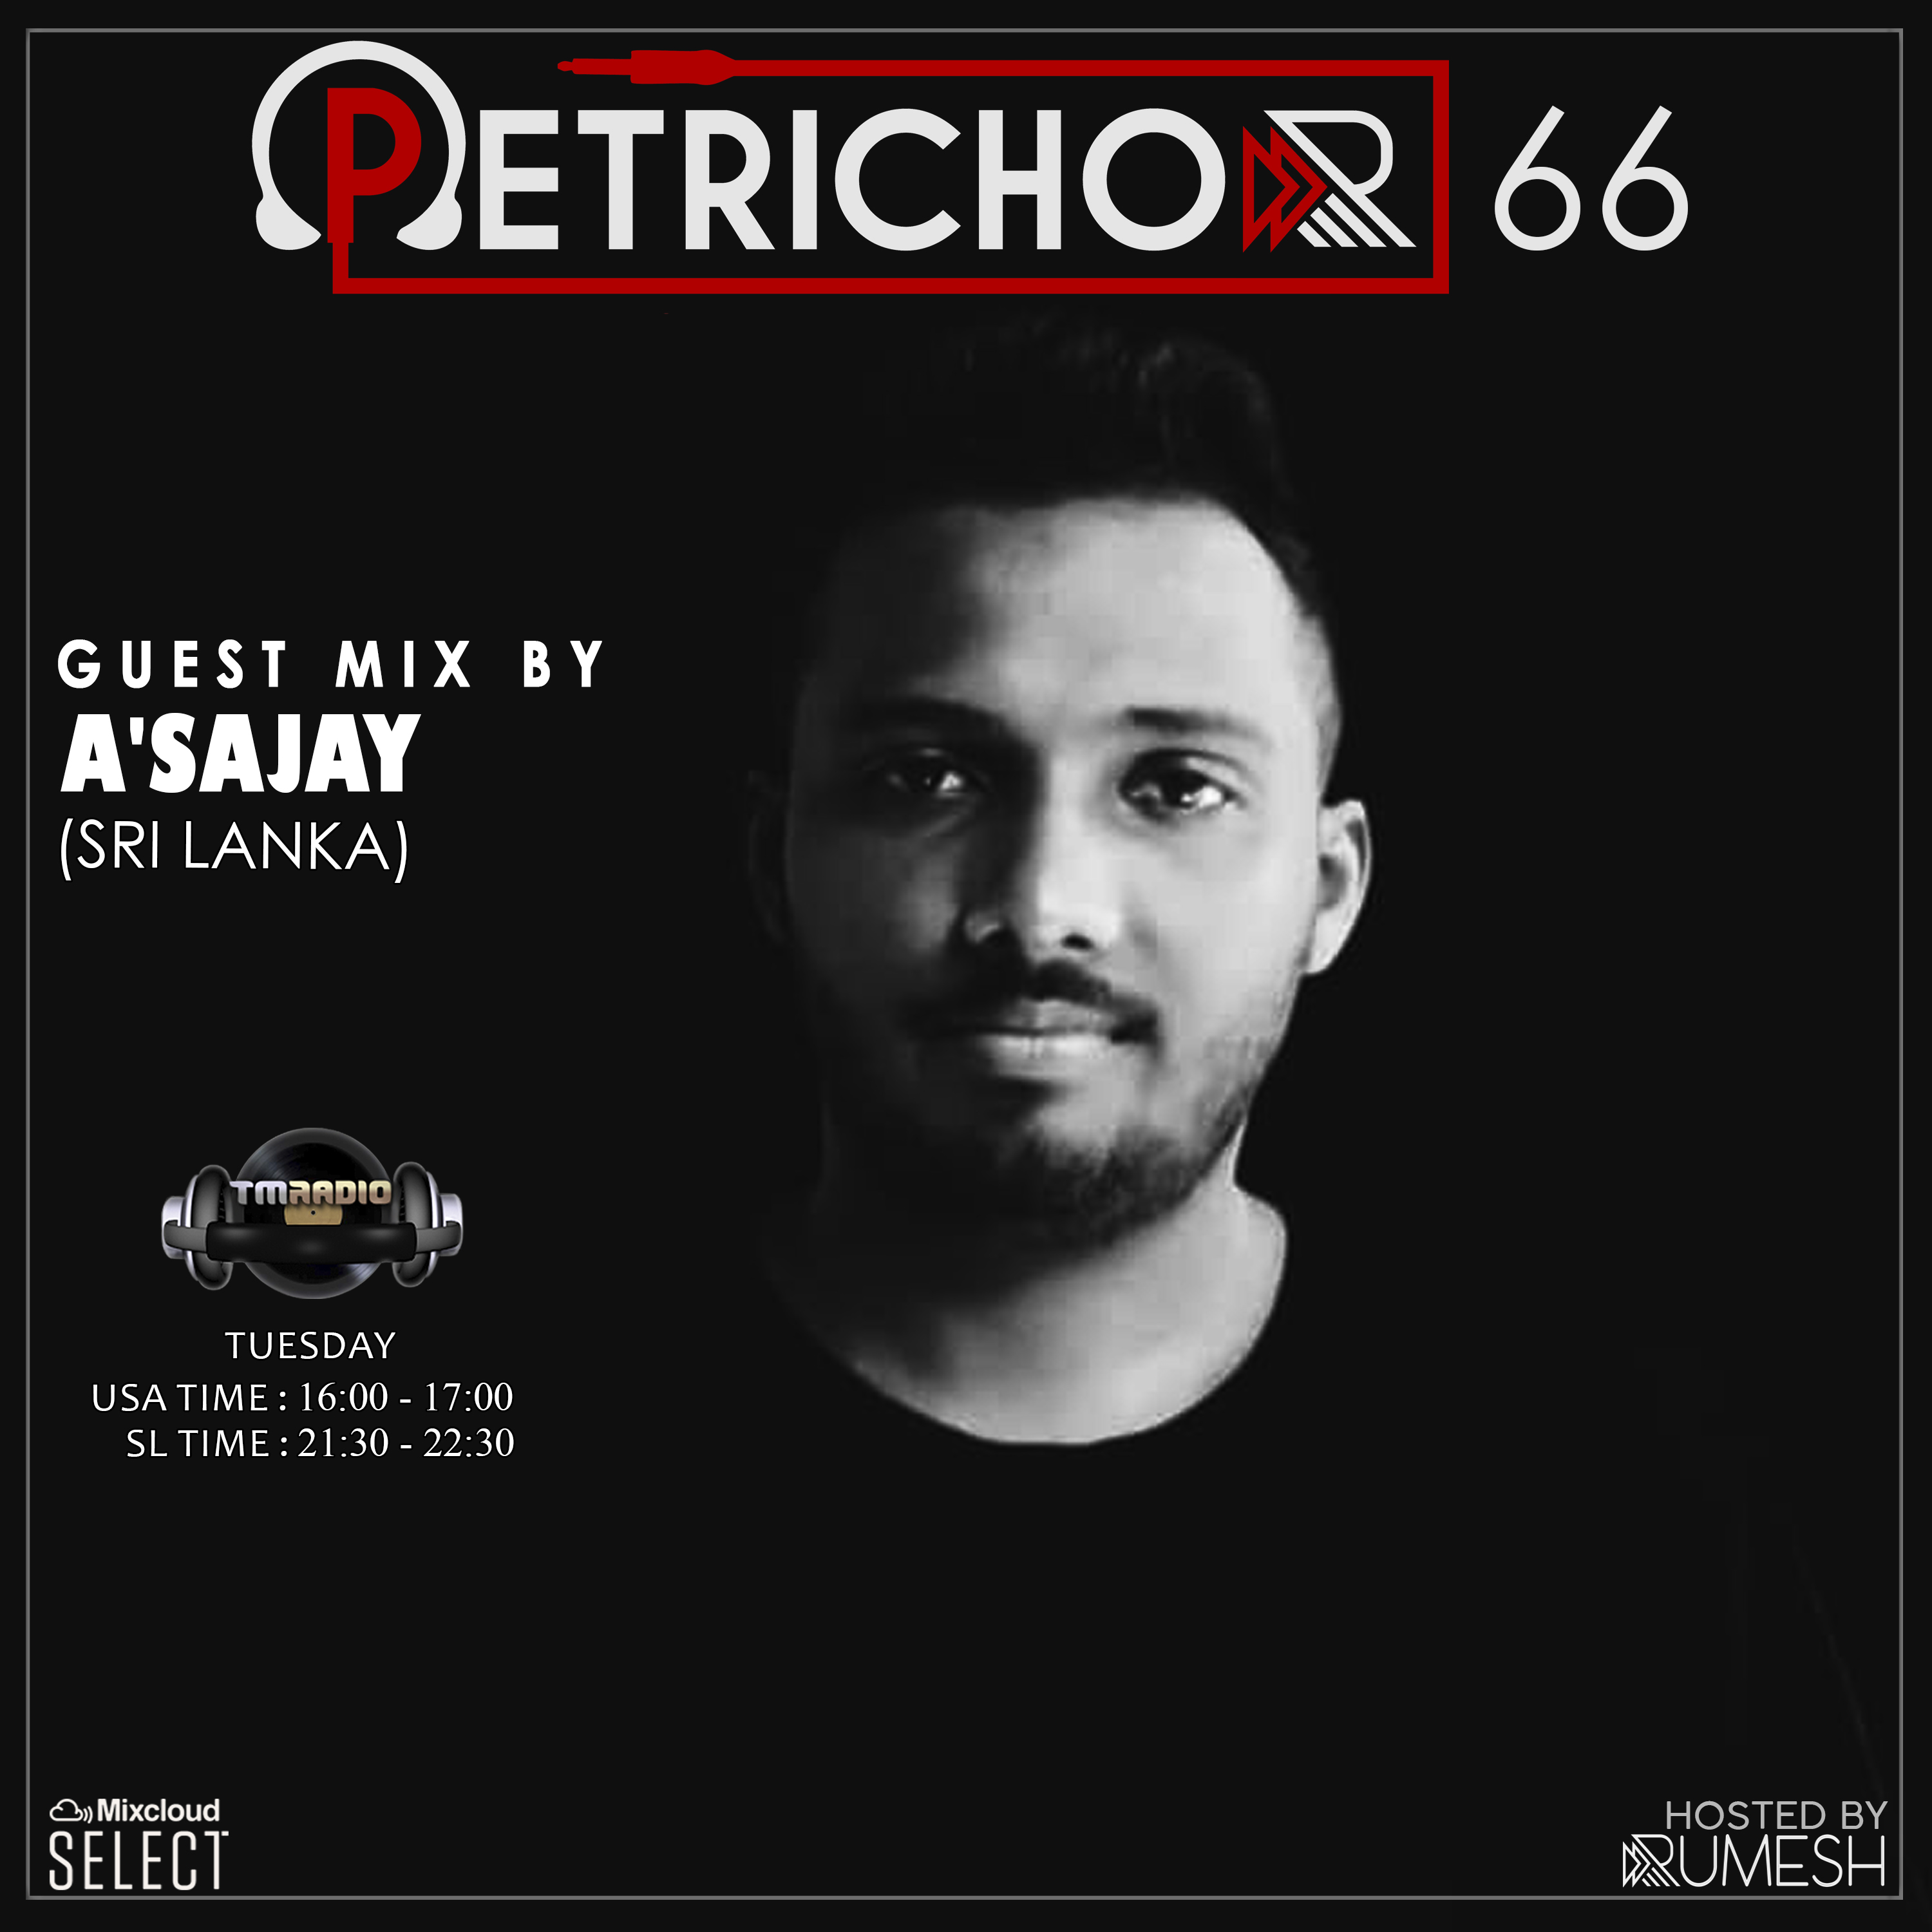 Petrichor :: Petrichor 66 guest mix by A'SAJAY -(Sri Lanka) (aired on February 11th, 2020) banner logo